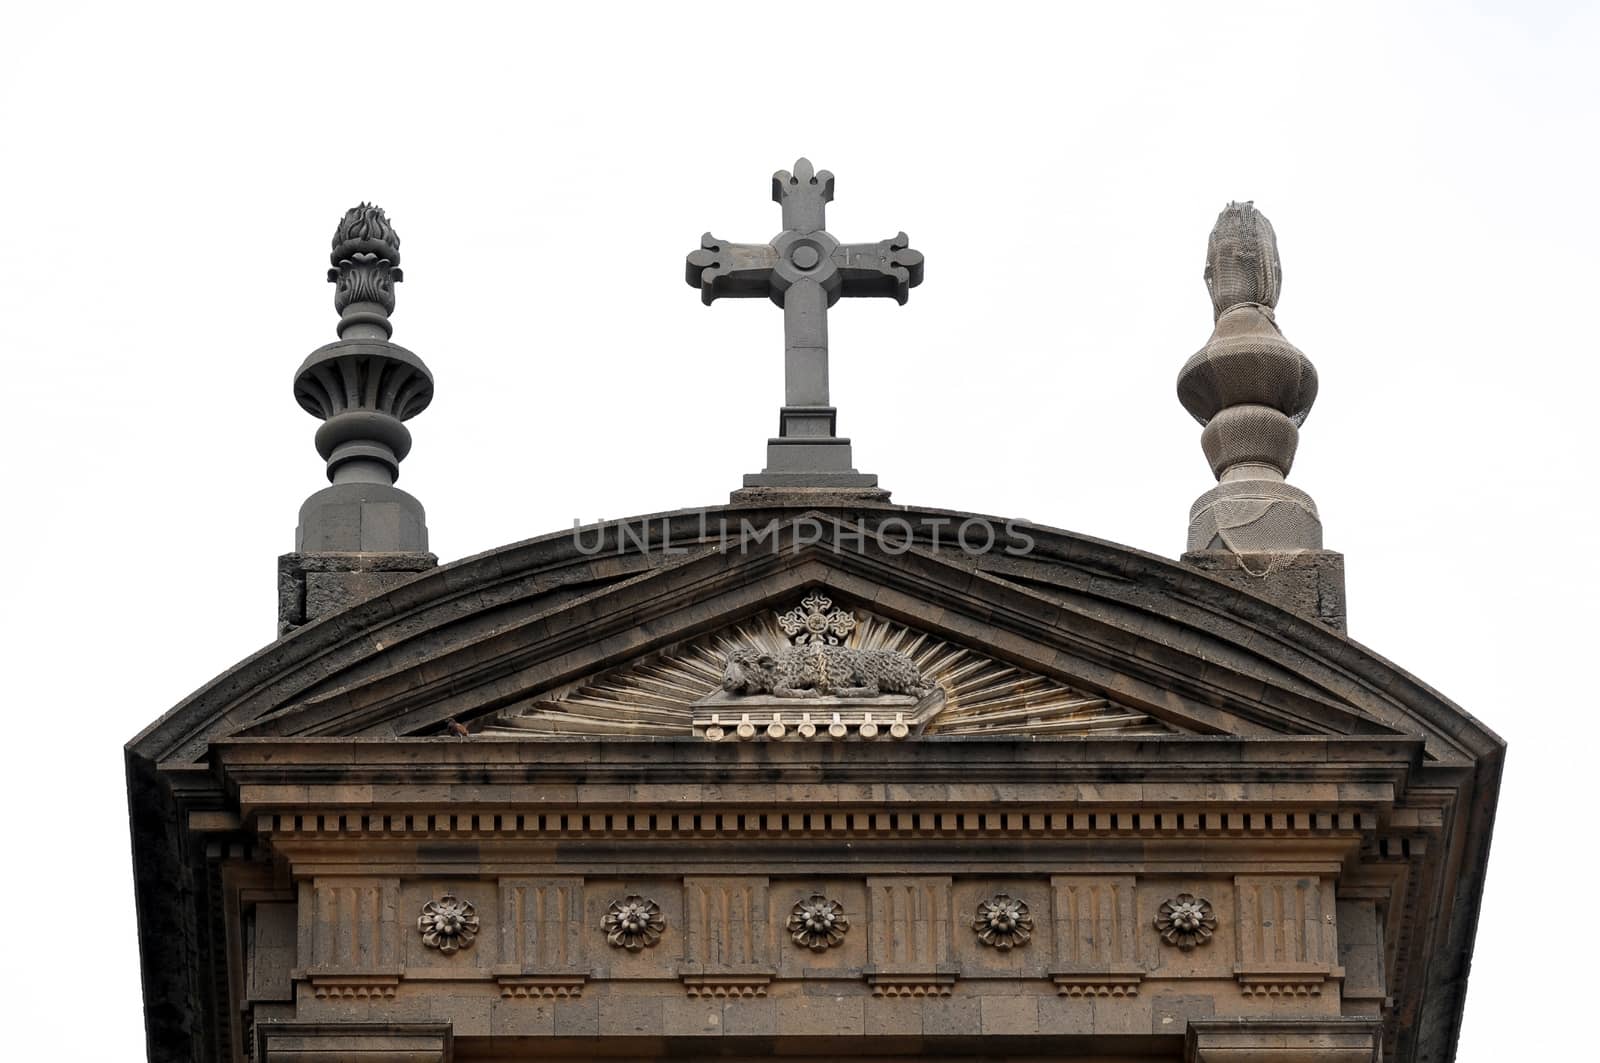 A Roof of an Old Church by underworld